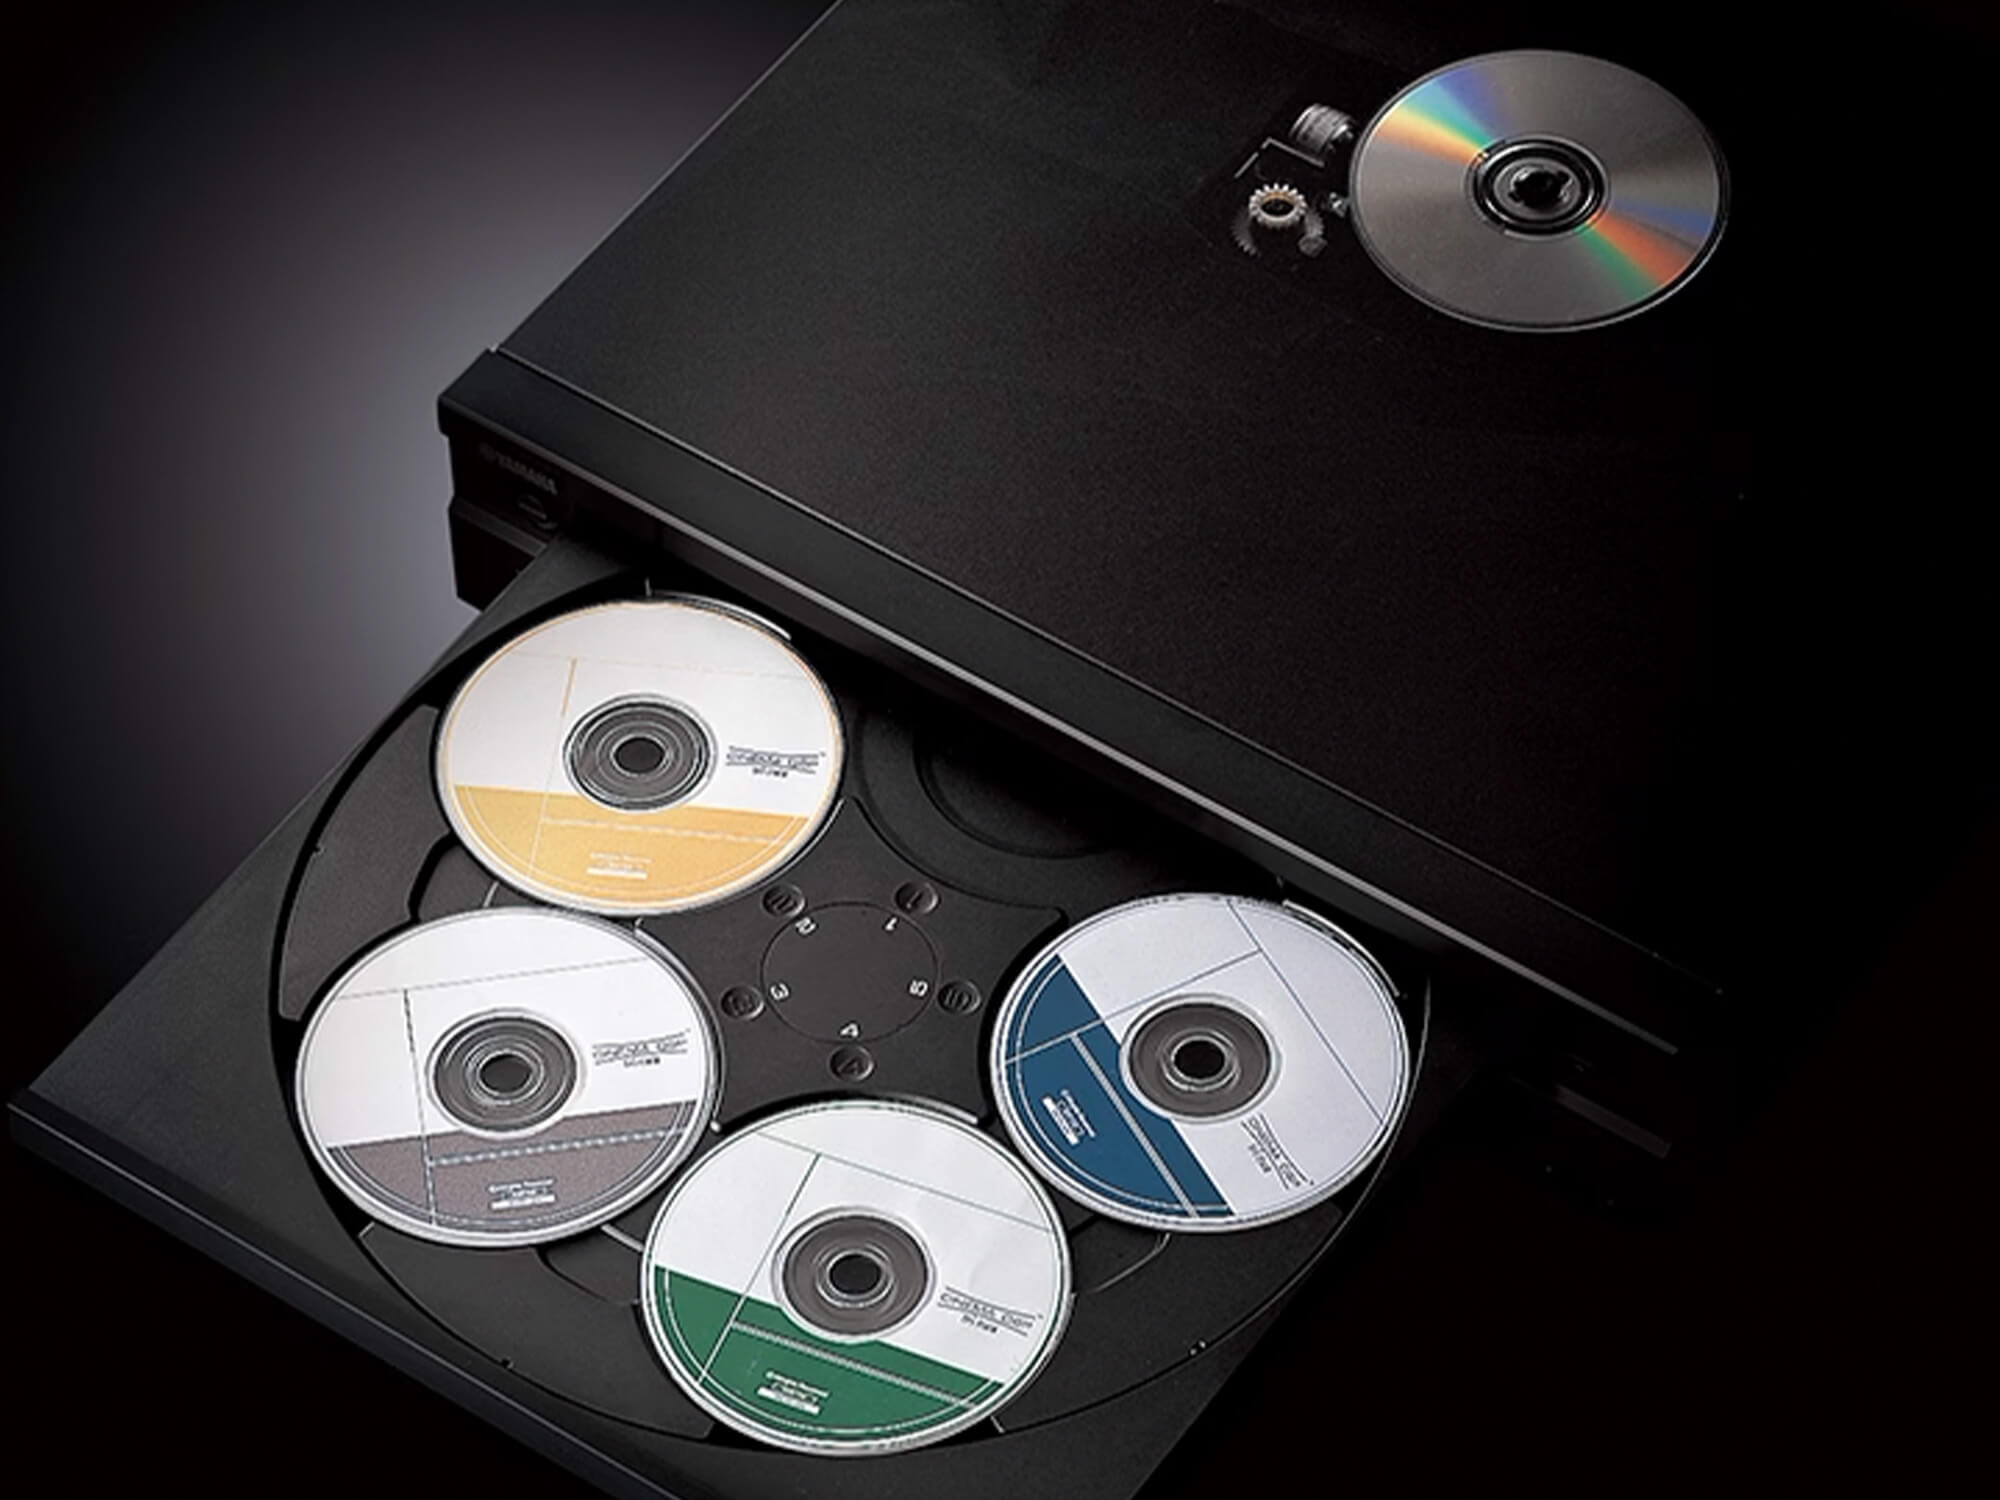 Yamaha CD-C603 player showing five discs in its large disc tray.